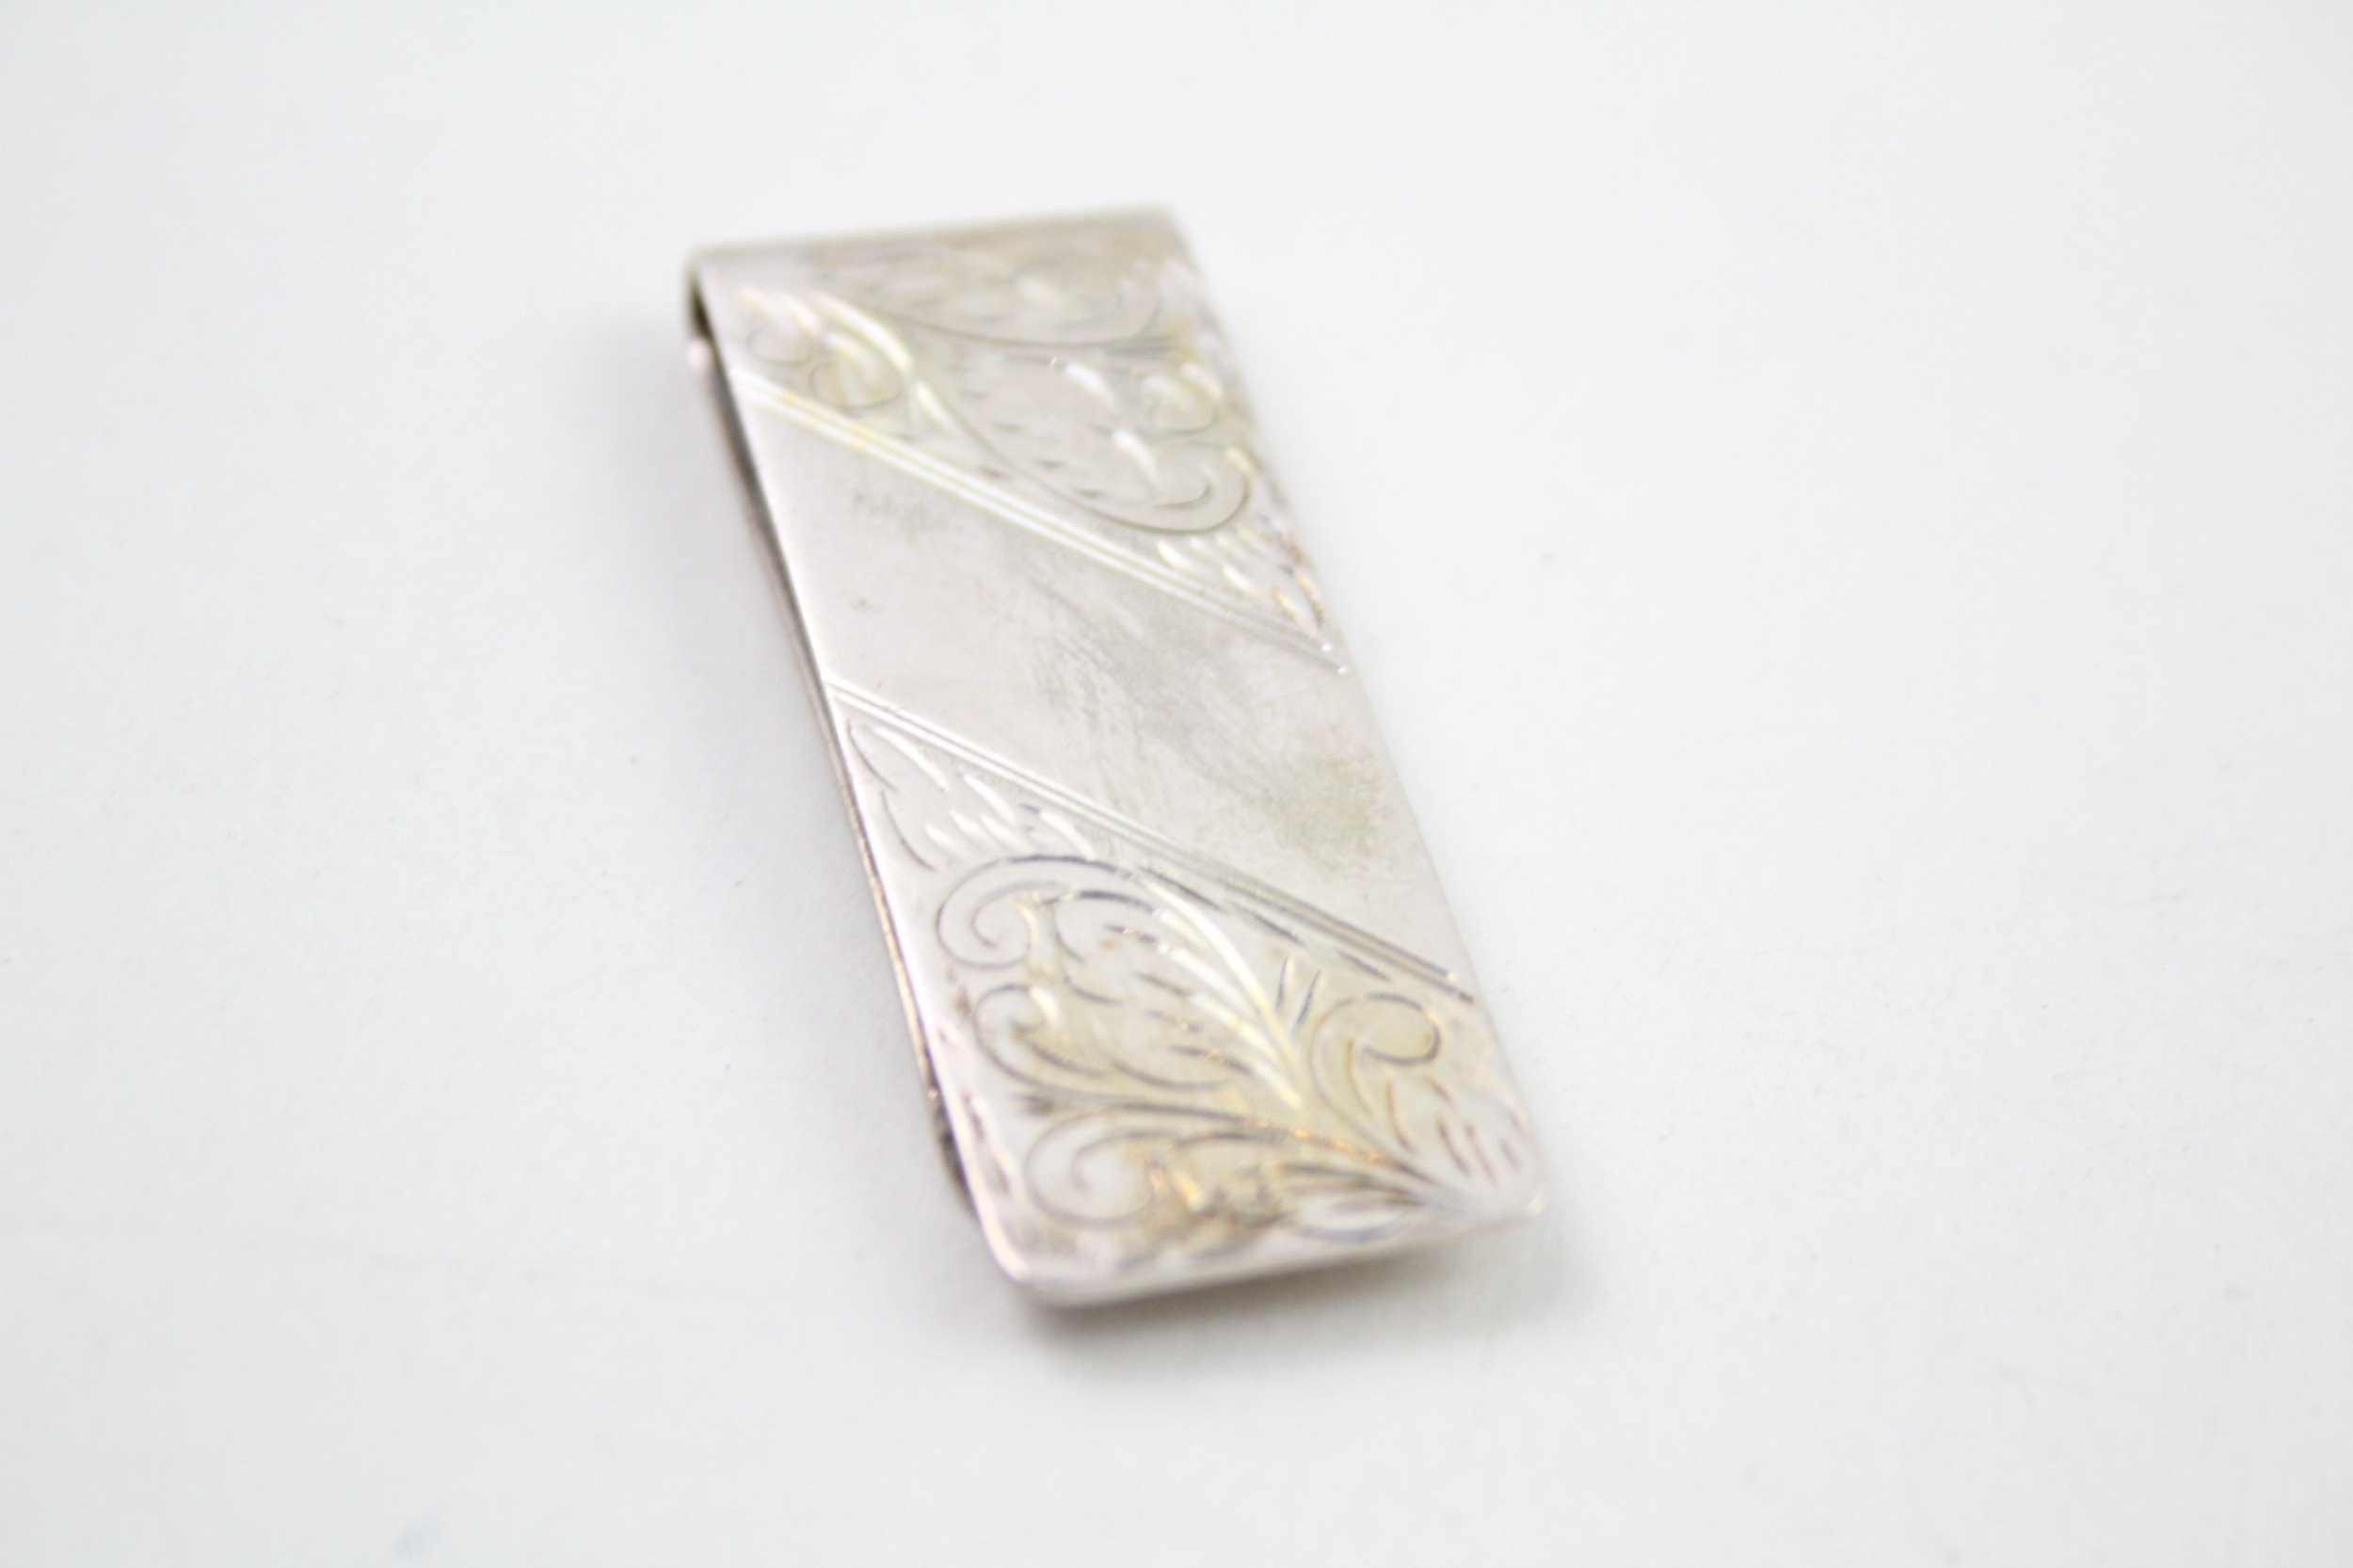 2 x .925 sterling money clips - Image 2 of 4